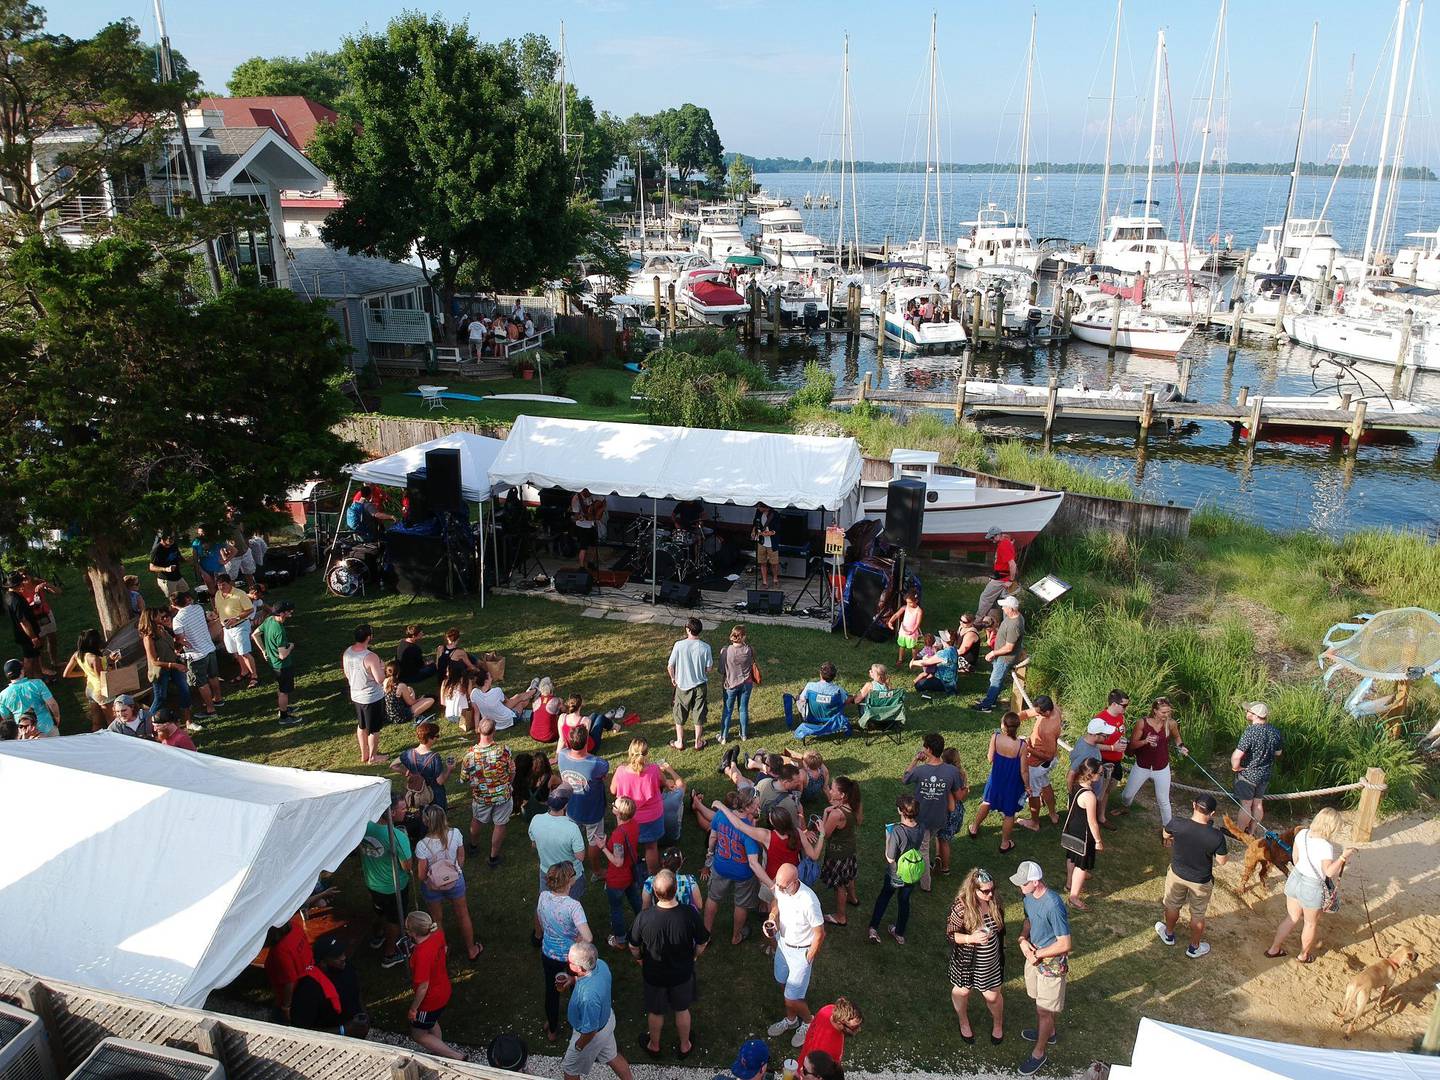 Calling itself “Annapolis’ Home-Grown Local Music Festival,” this all-day festival features 35 bands on four stages Saturday at the Annapolis Maritime Museum & Park.